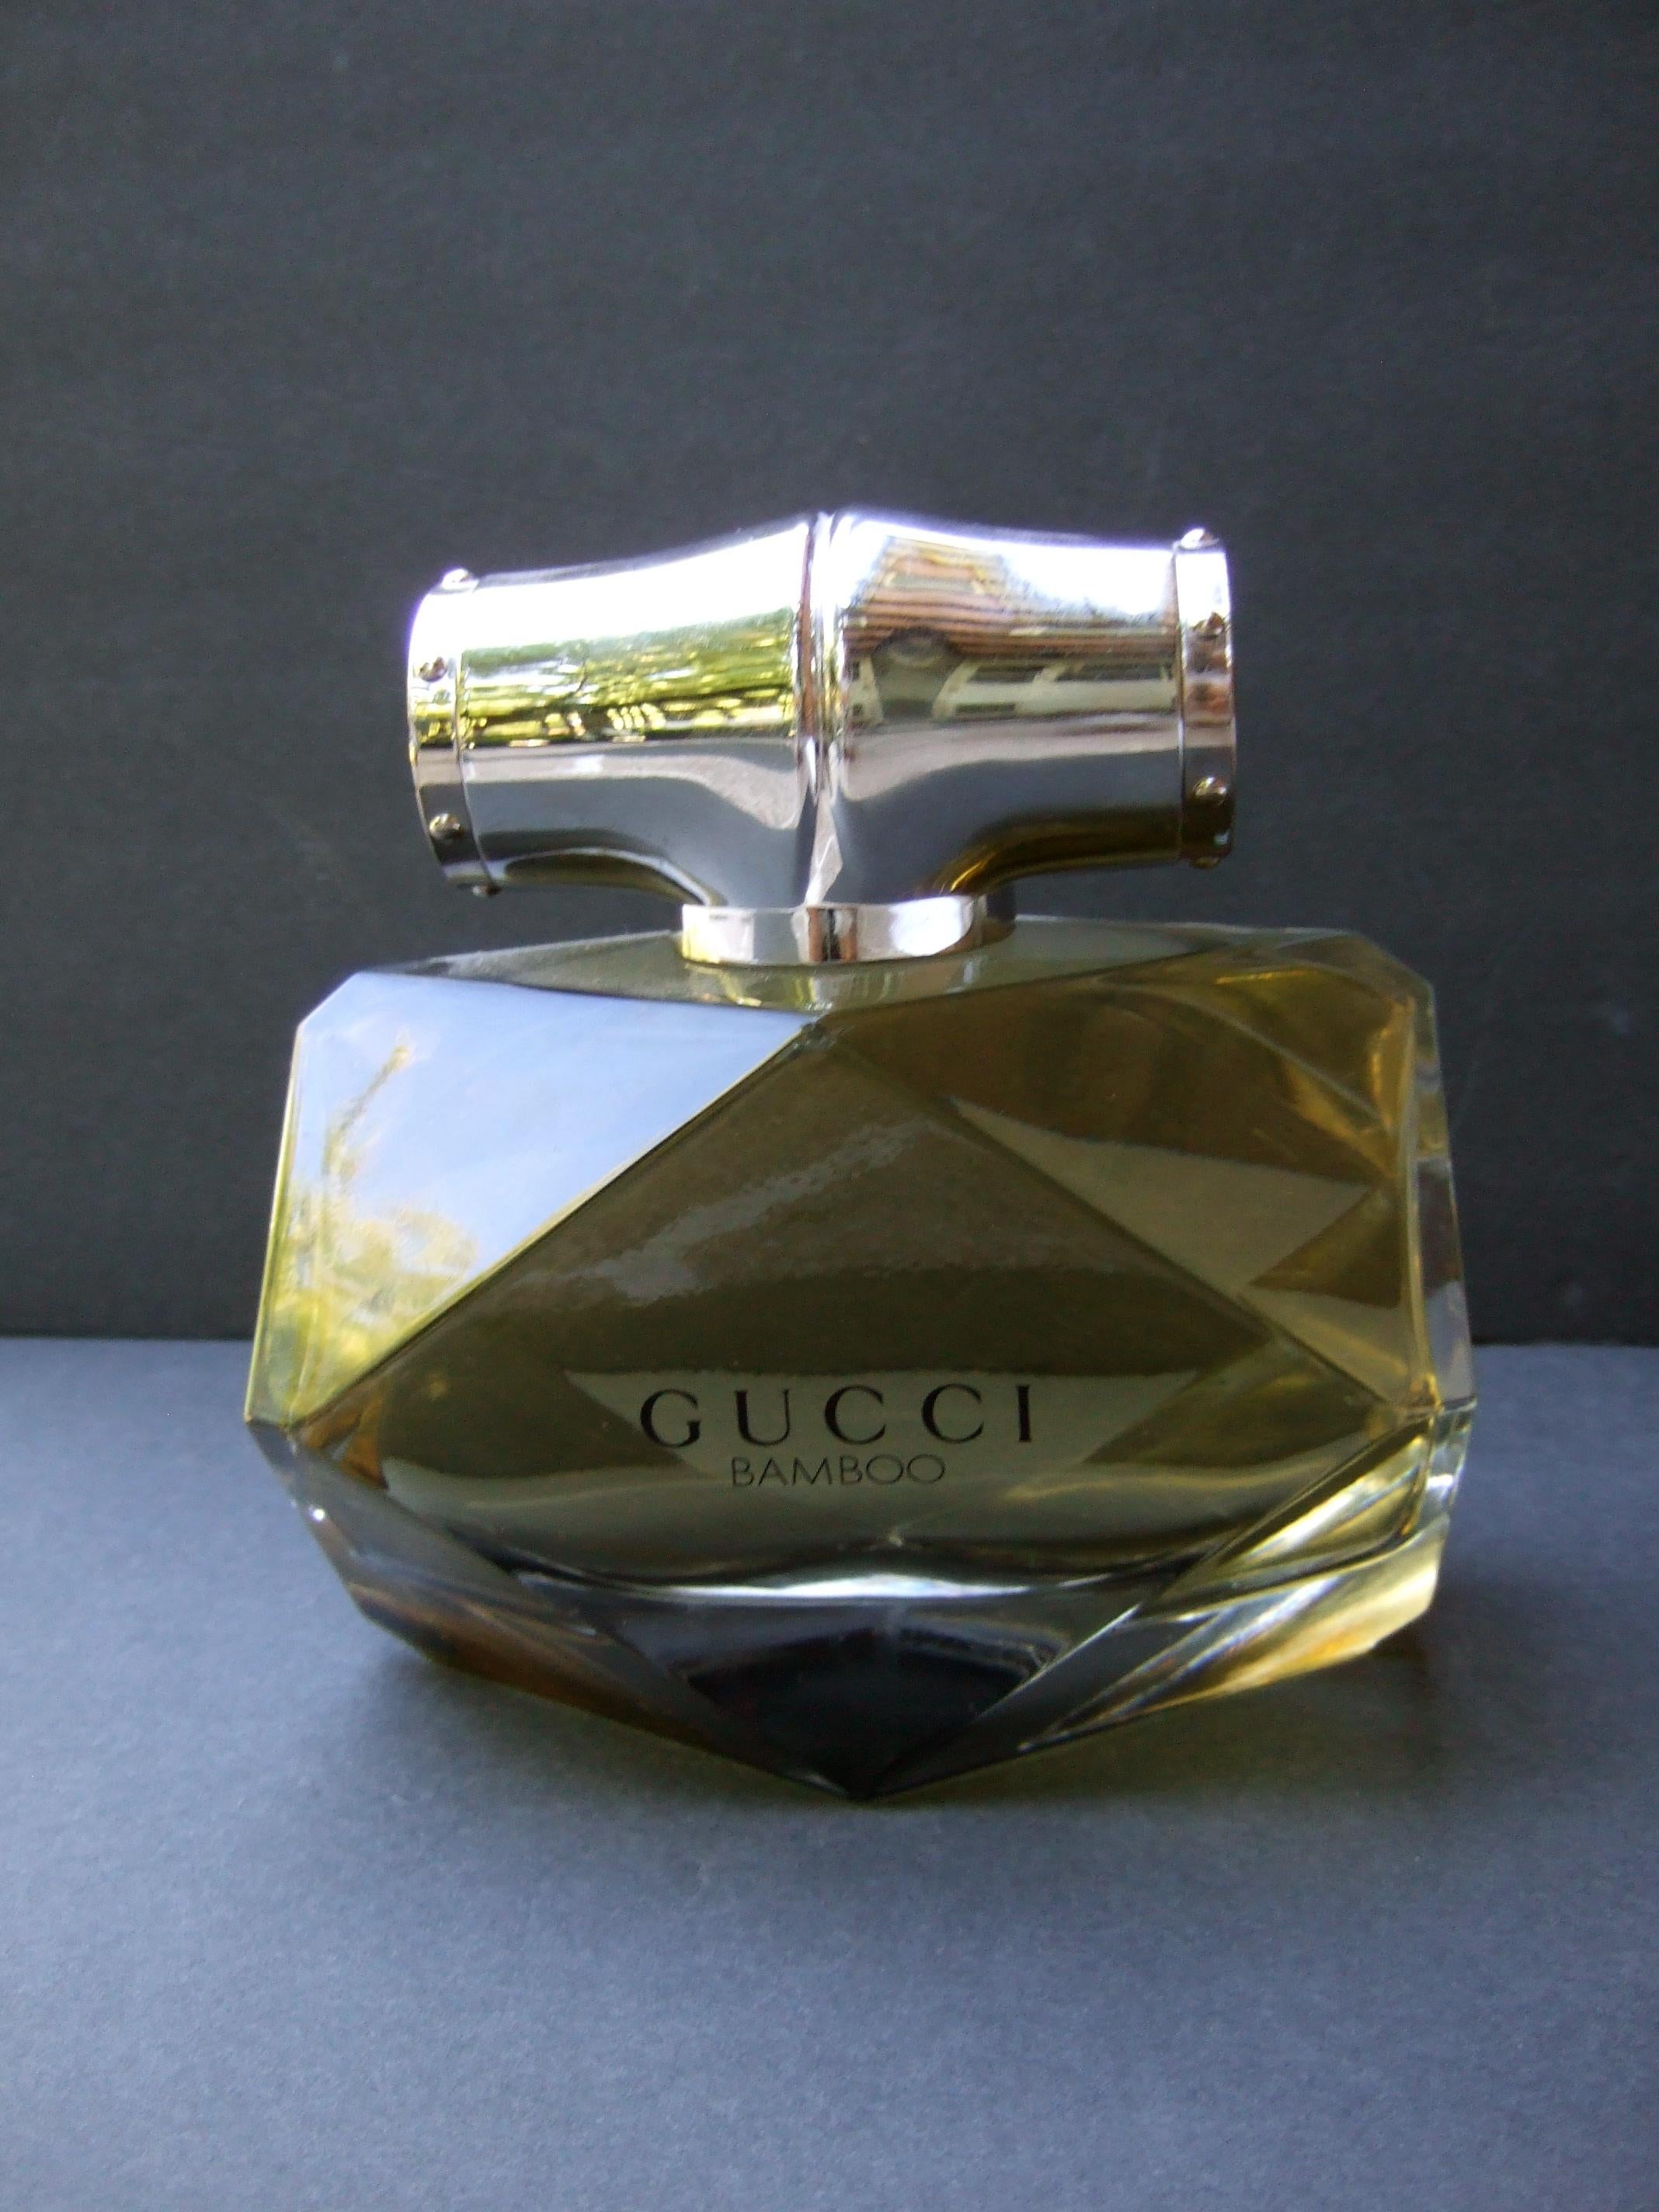 Gucci Bamboo Huge Glass Factice Faceted Display Decorative Bottle c 21st c  In Good Condition For Sale In University City, MO